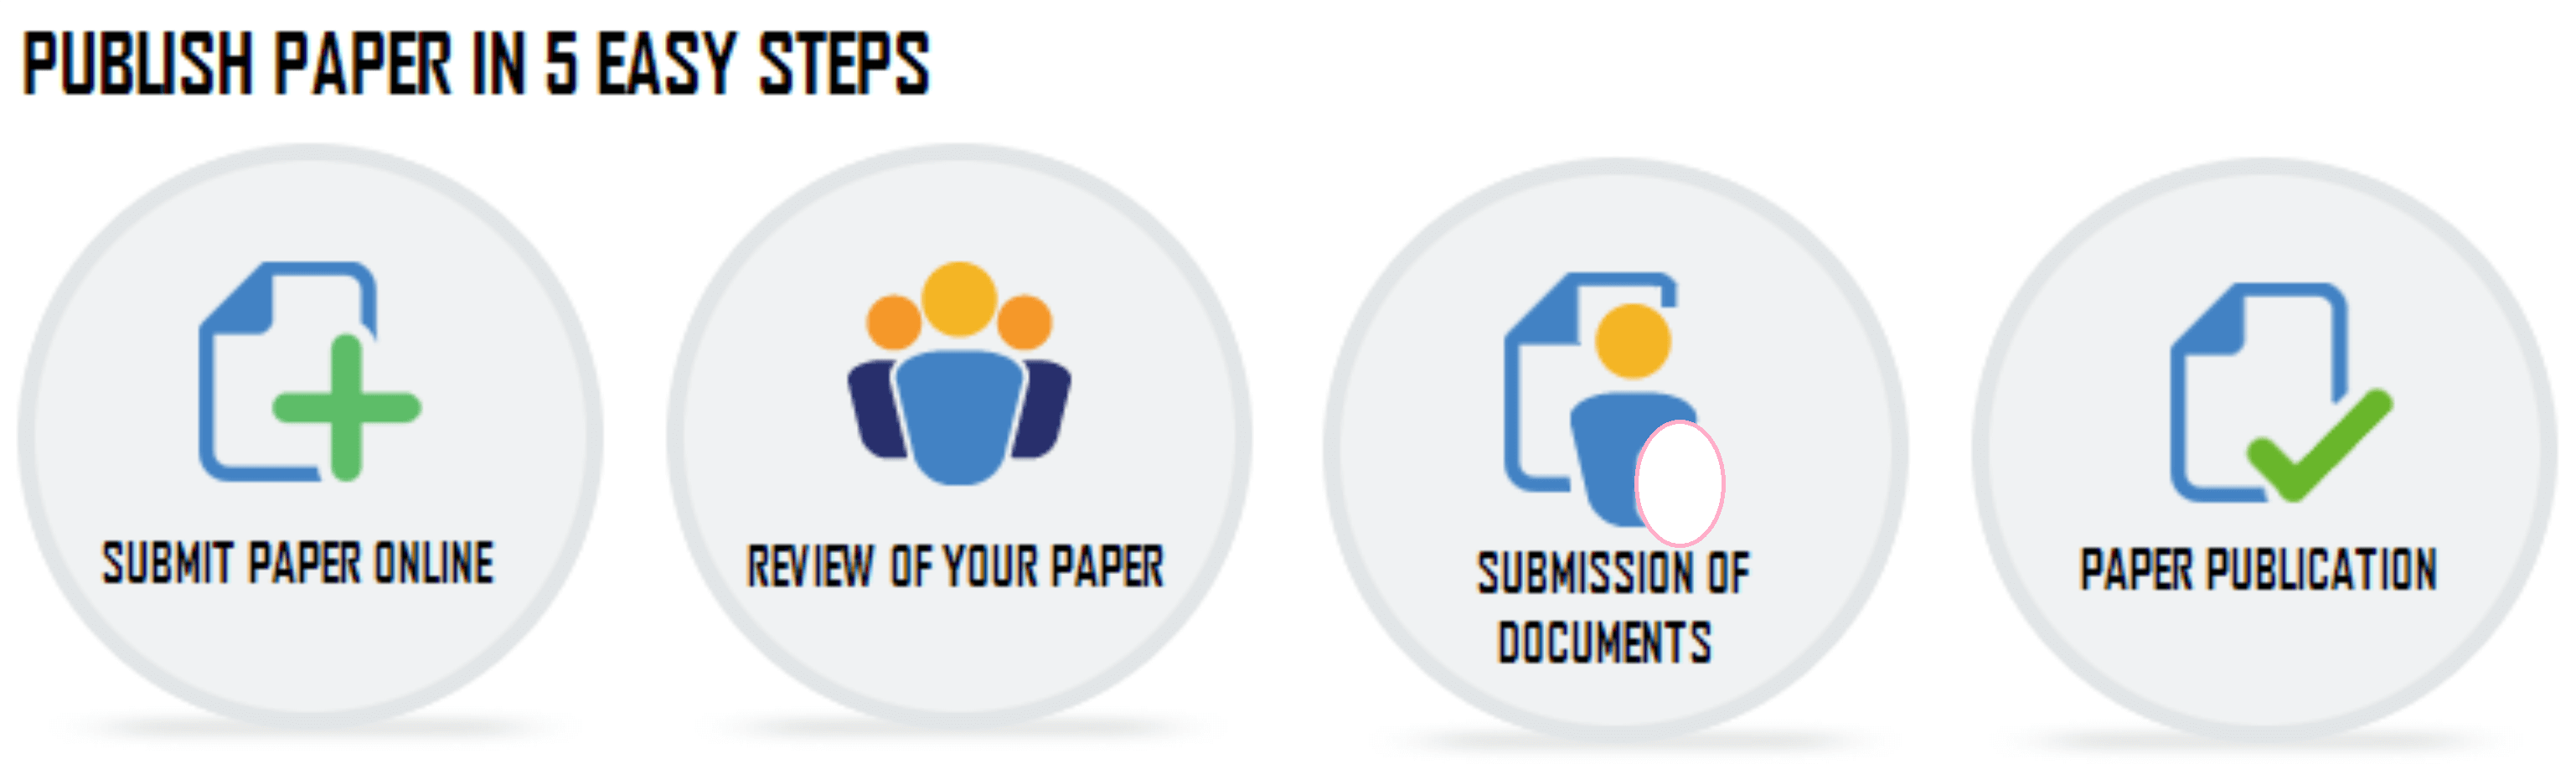 ugc guidelines for research paper publication